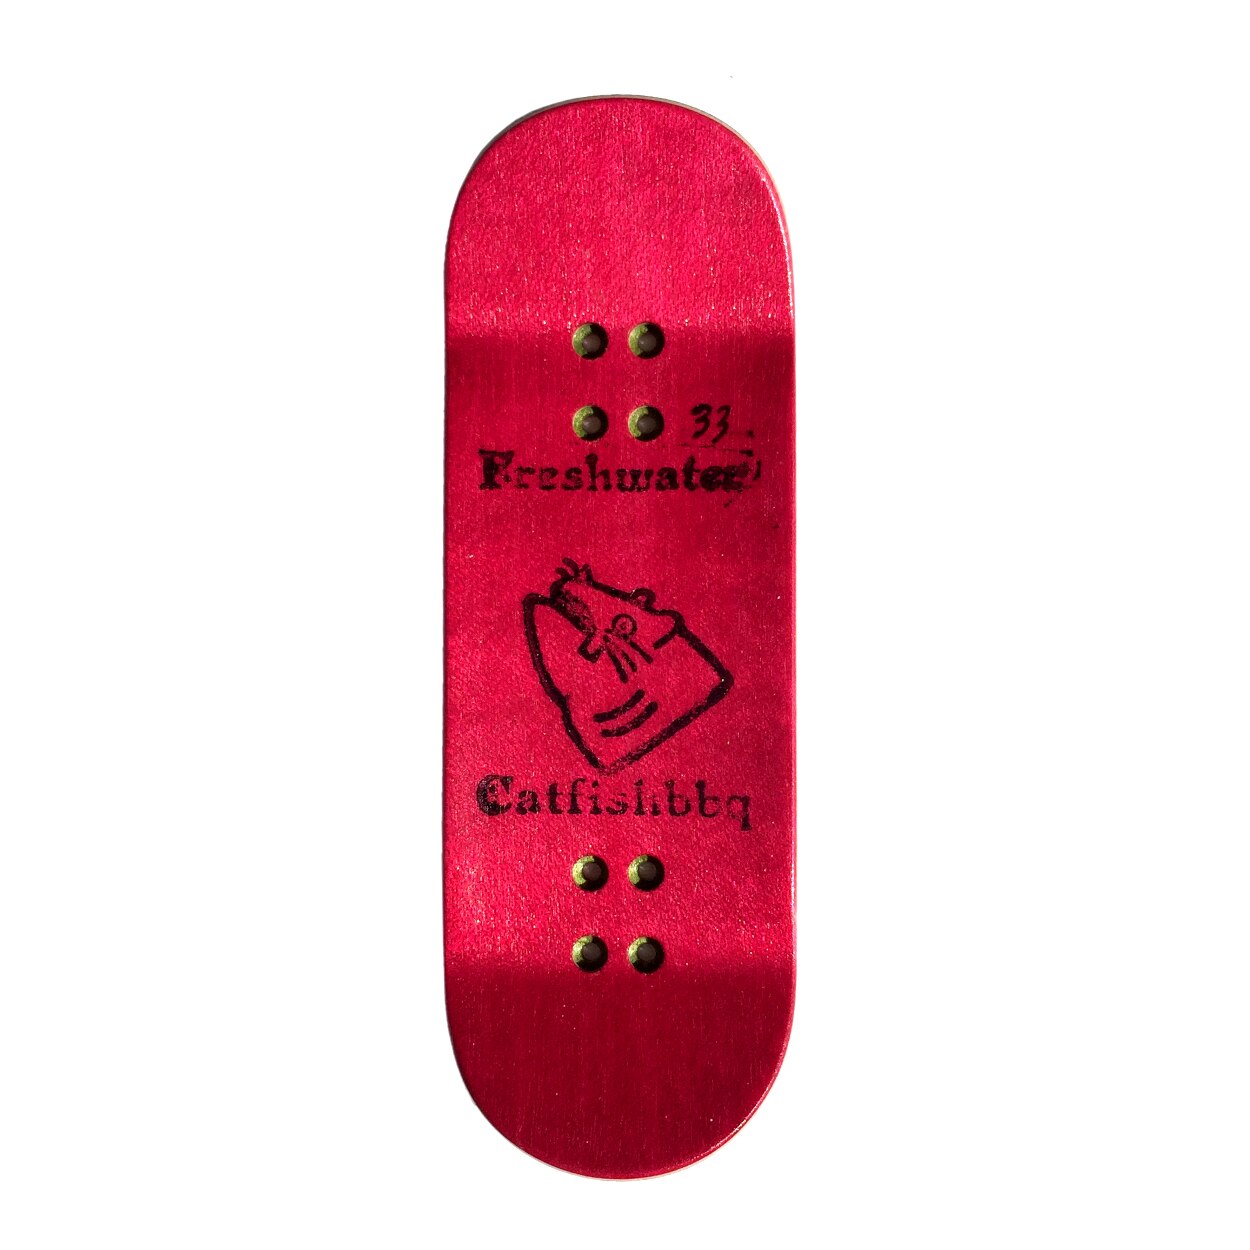 Catfishbbq X Cowply The Gang Fingerboard Deck (Freshwater) - Assorted